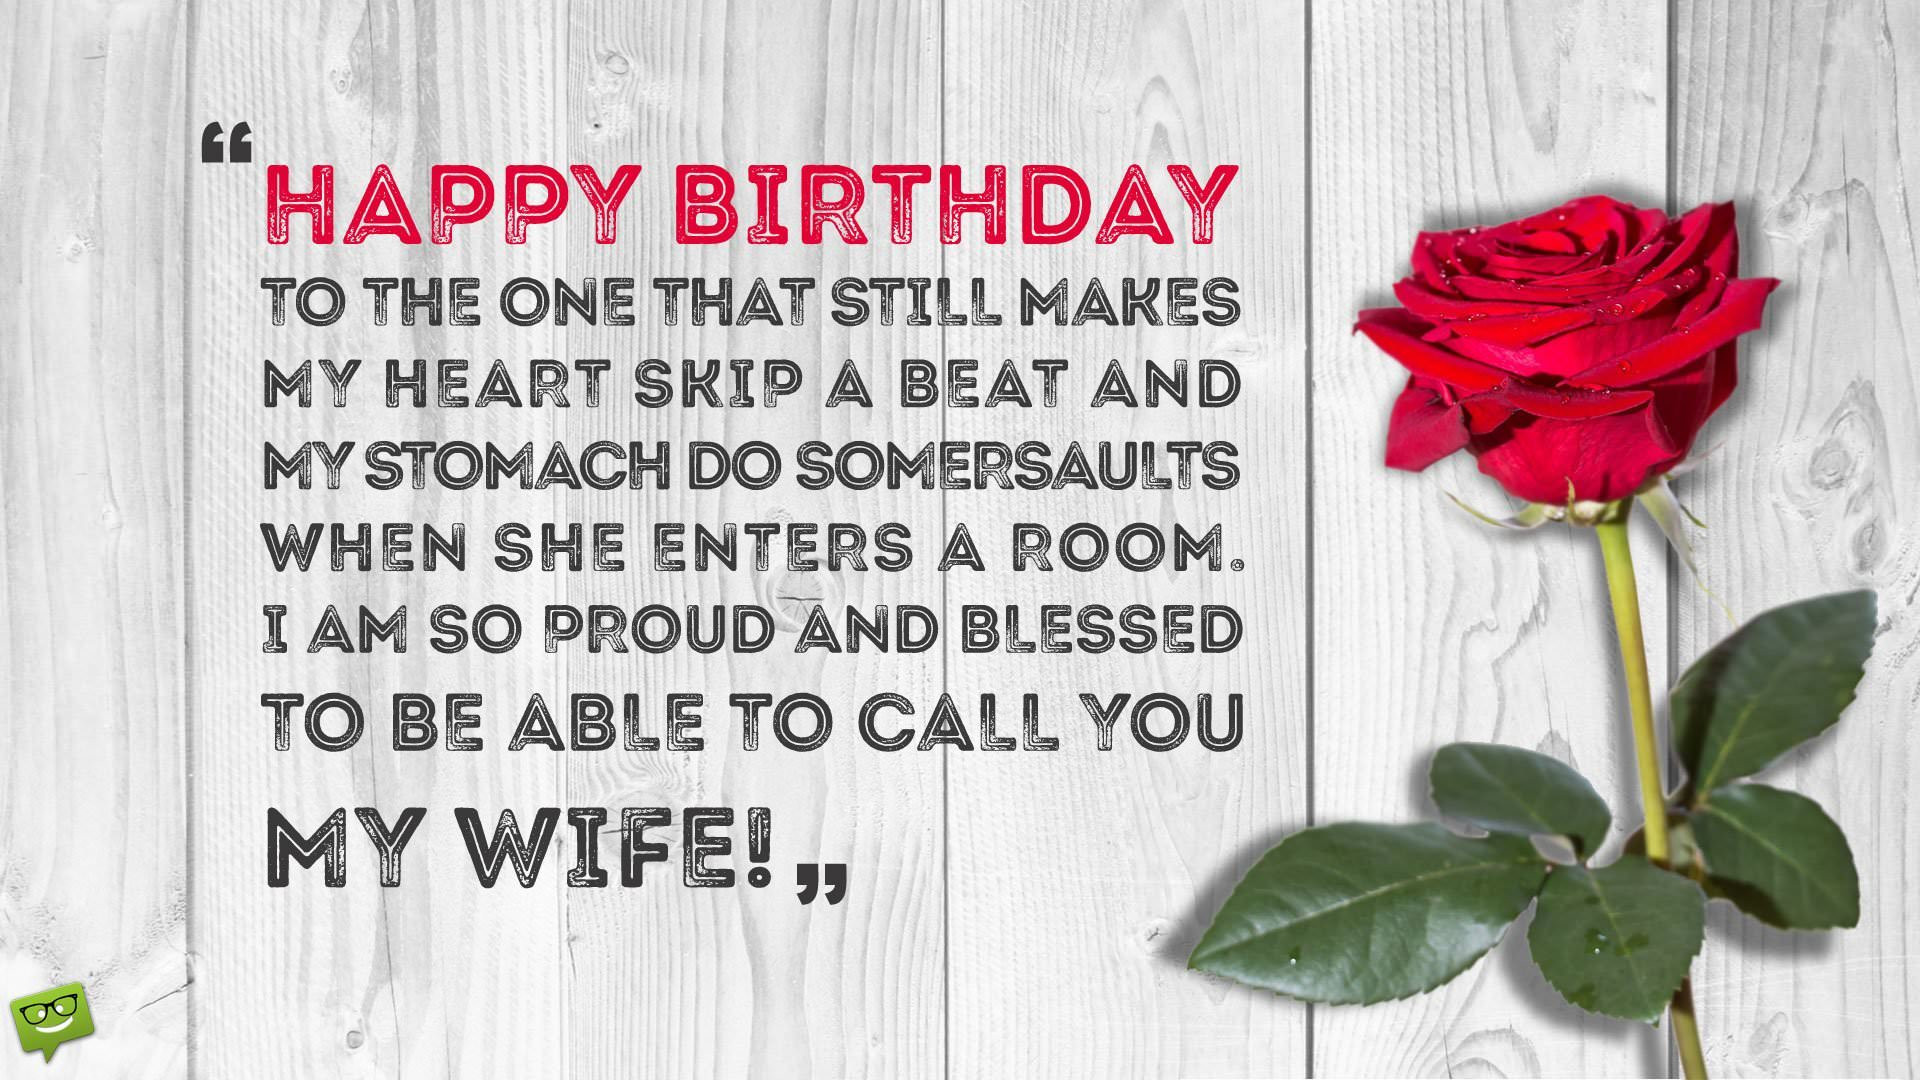 Happy Birthday Wishes To My Wife
 Romantic Birthday Wishes for your Wife